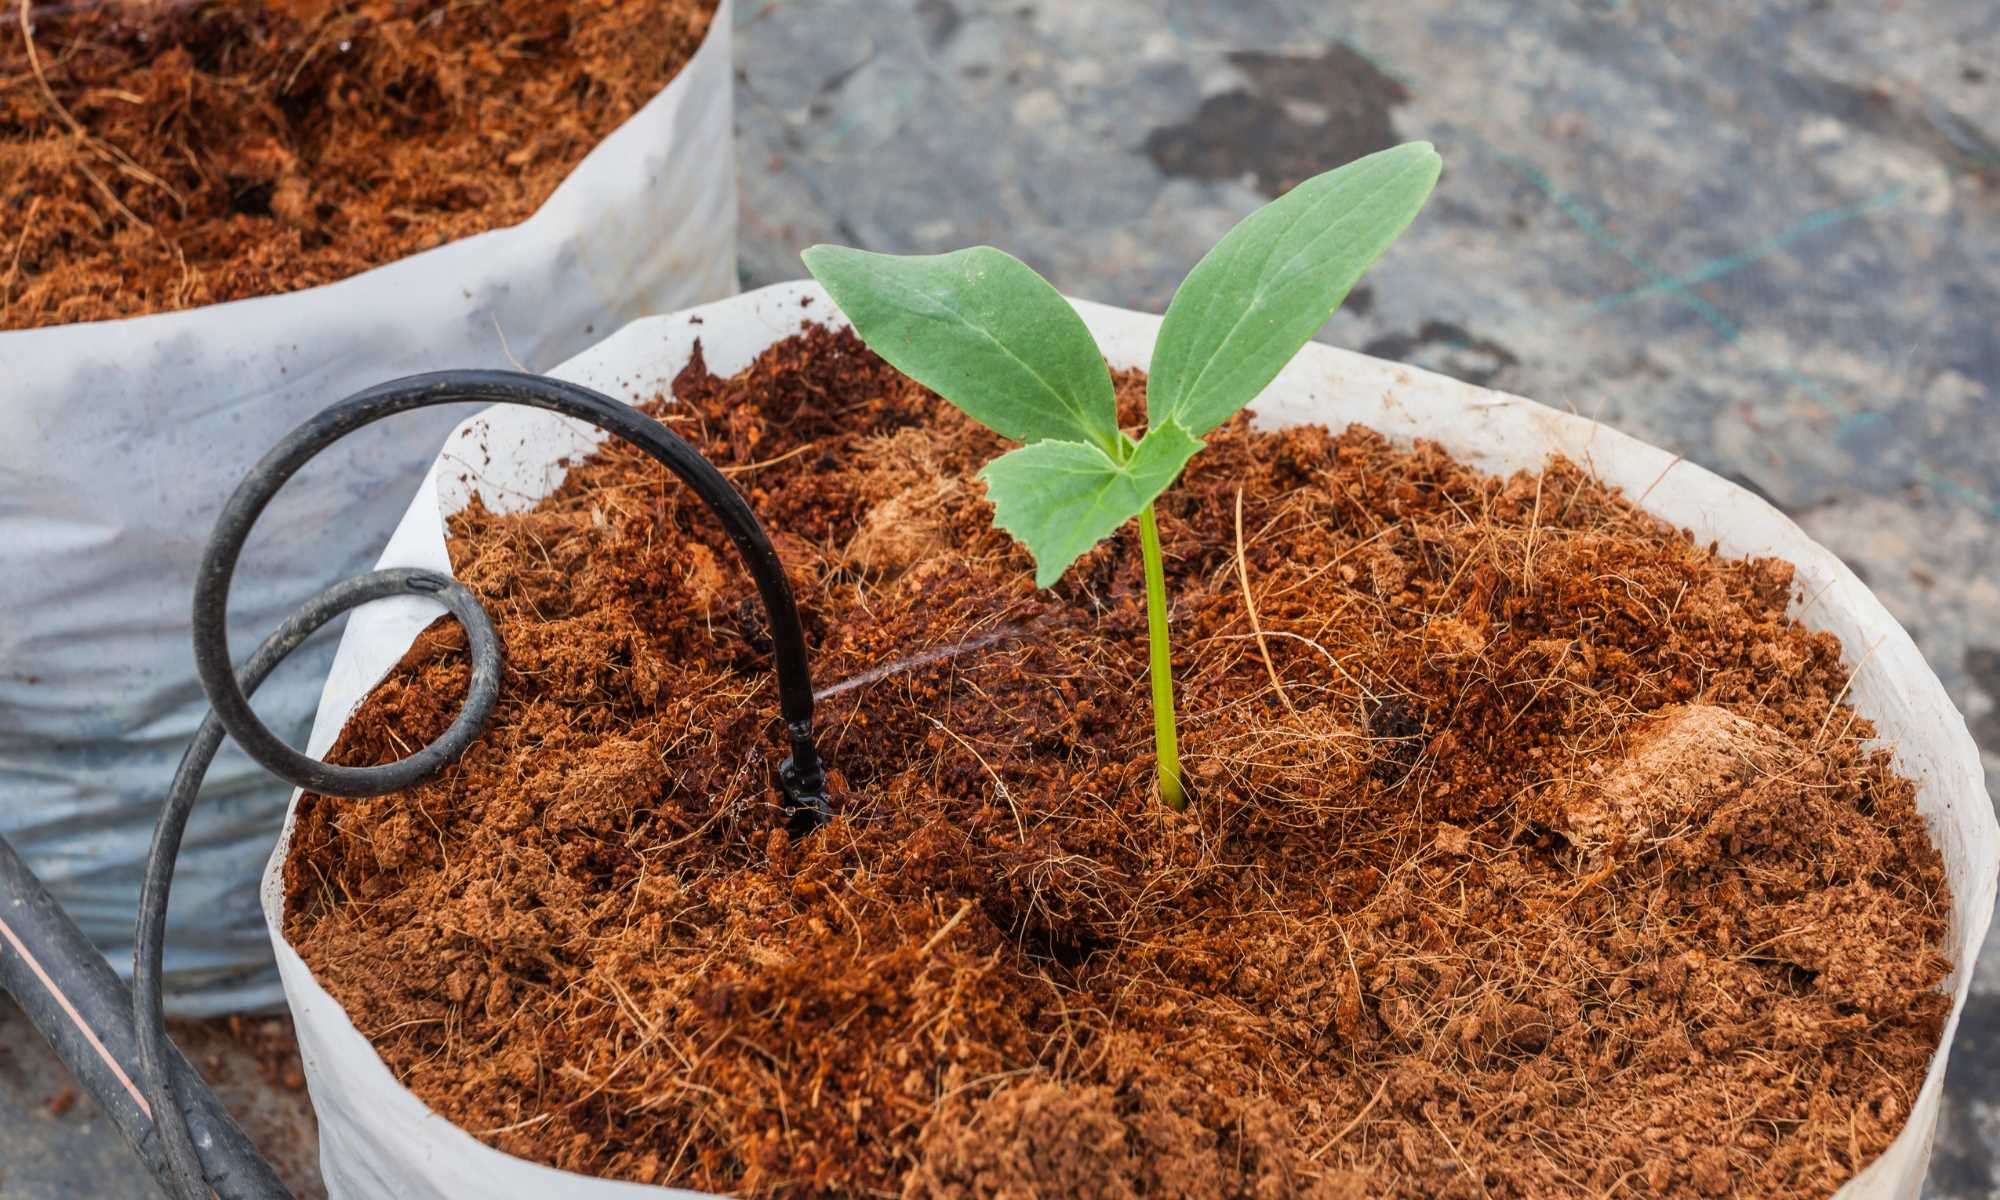 How To Use Coco Coir In Hydroponics